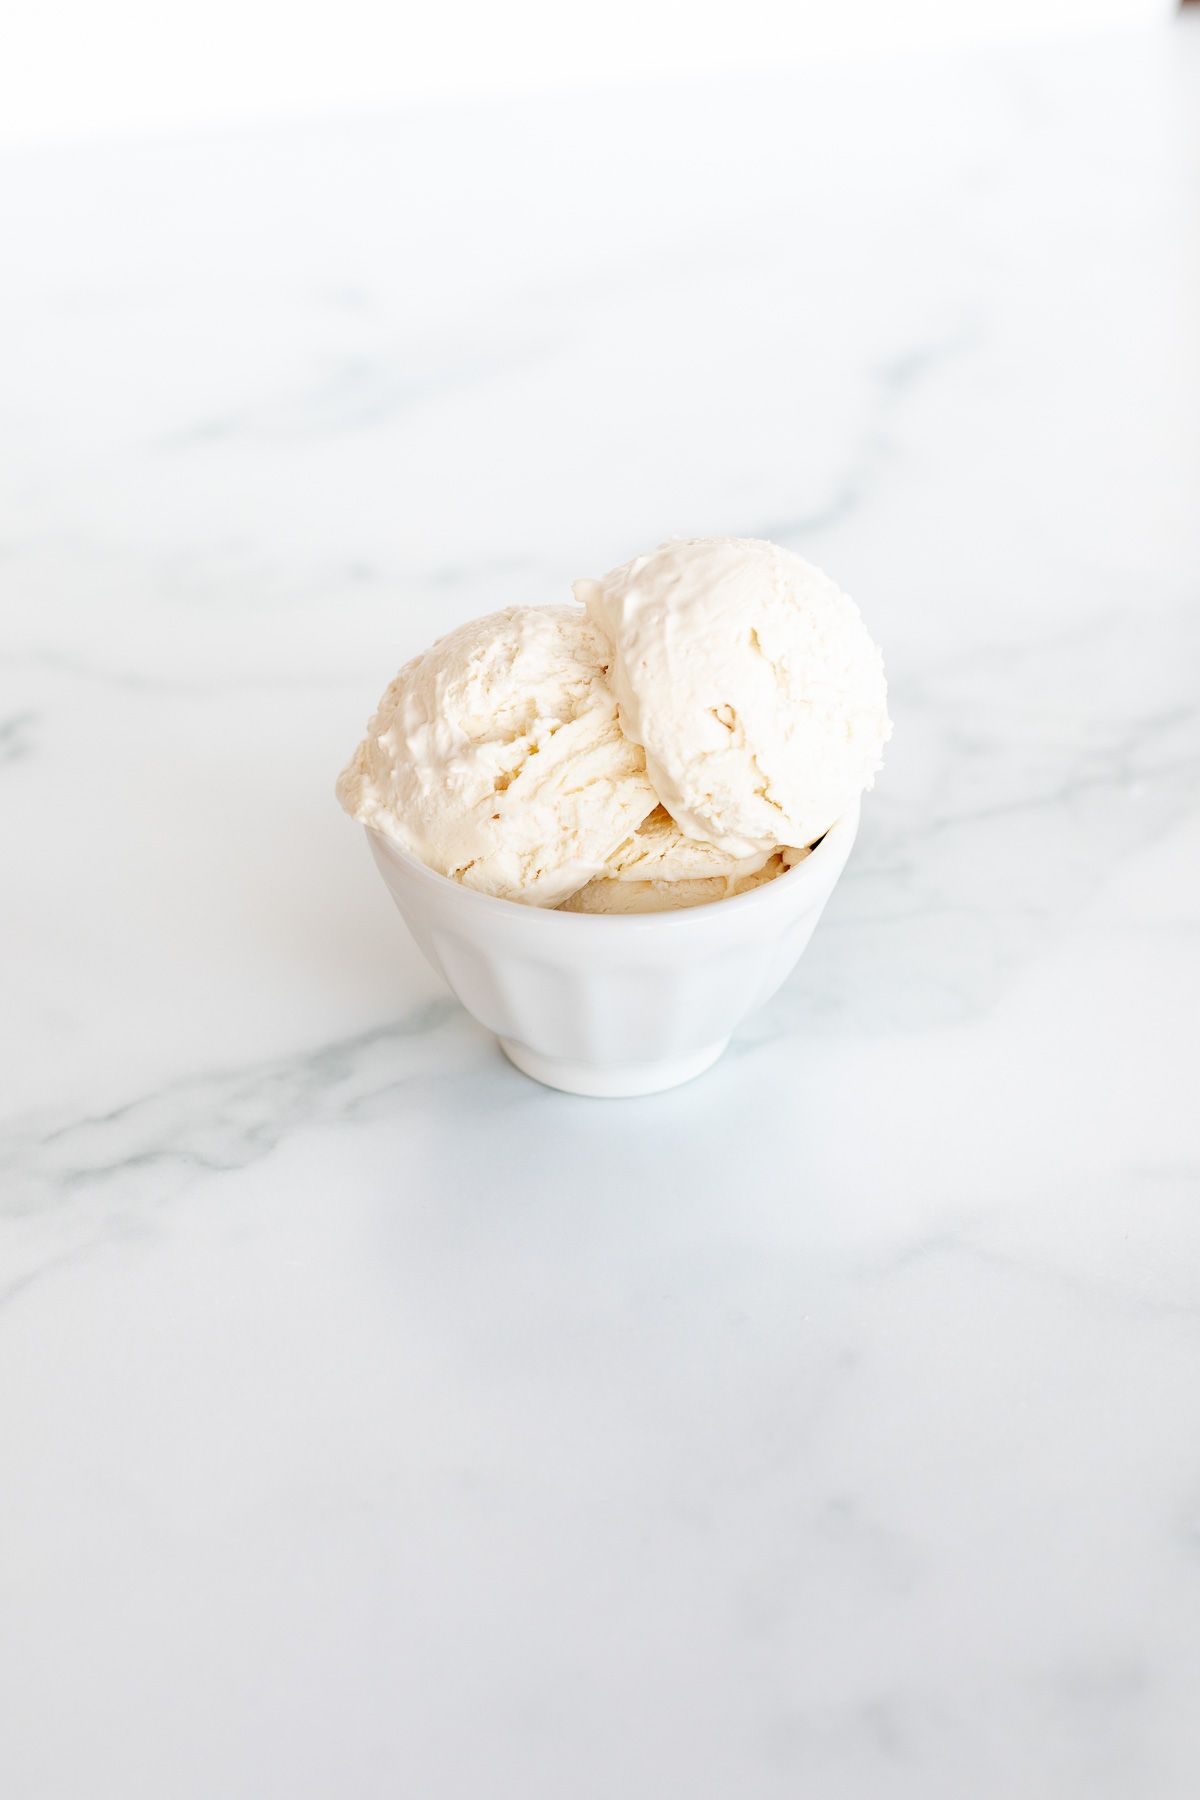 A white bowl on a marble surface, filled with frozen mascarpone ice cream